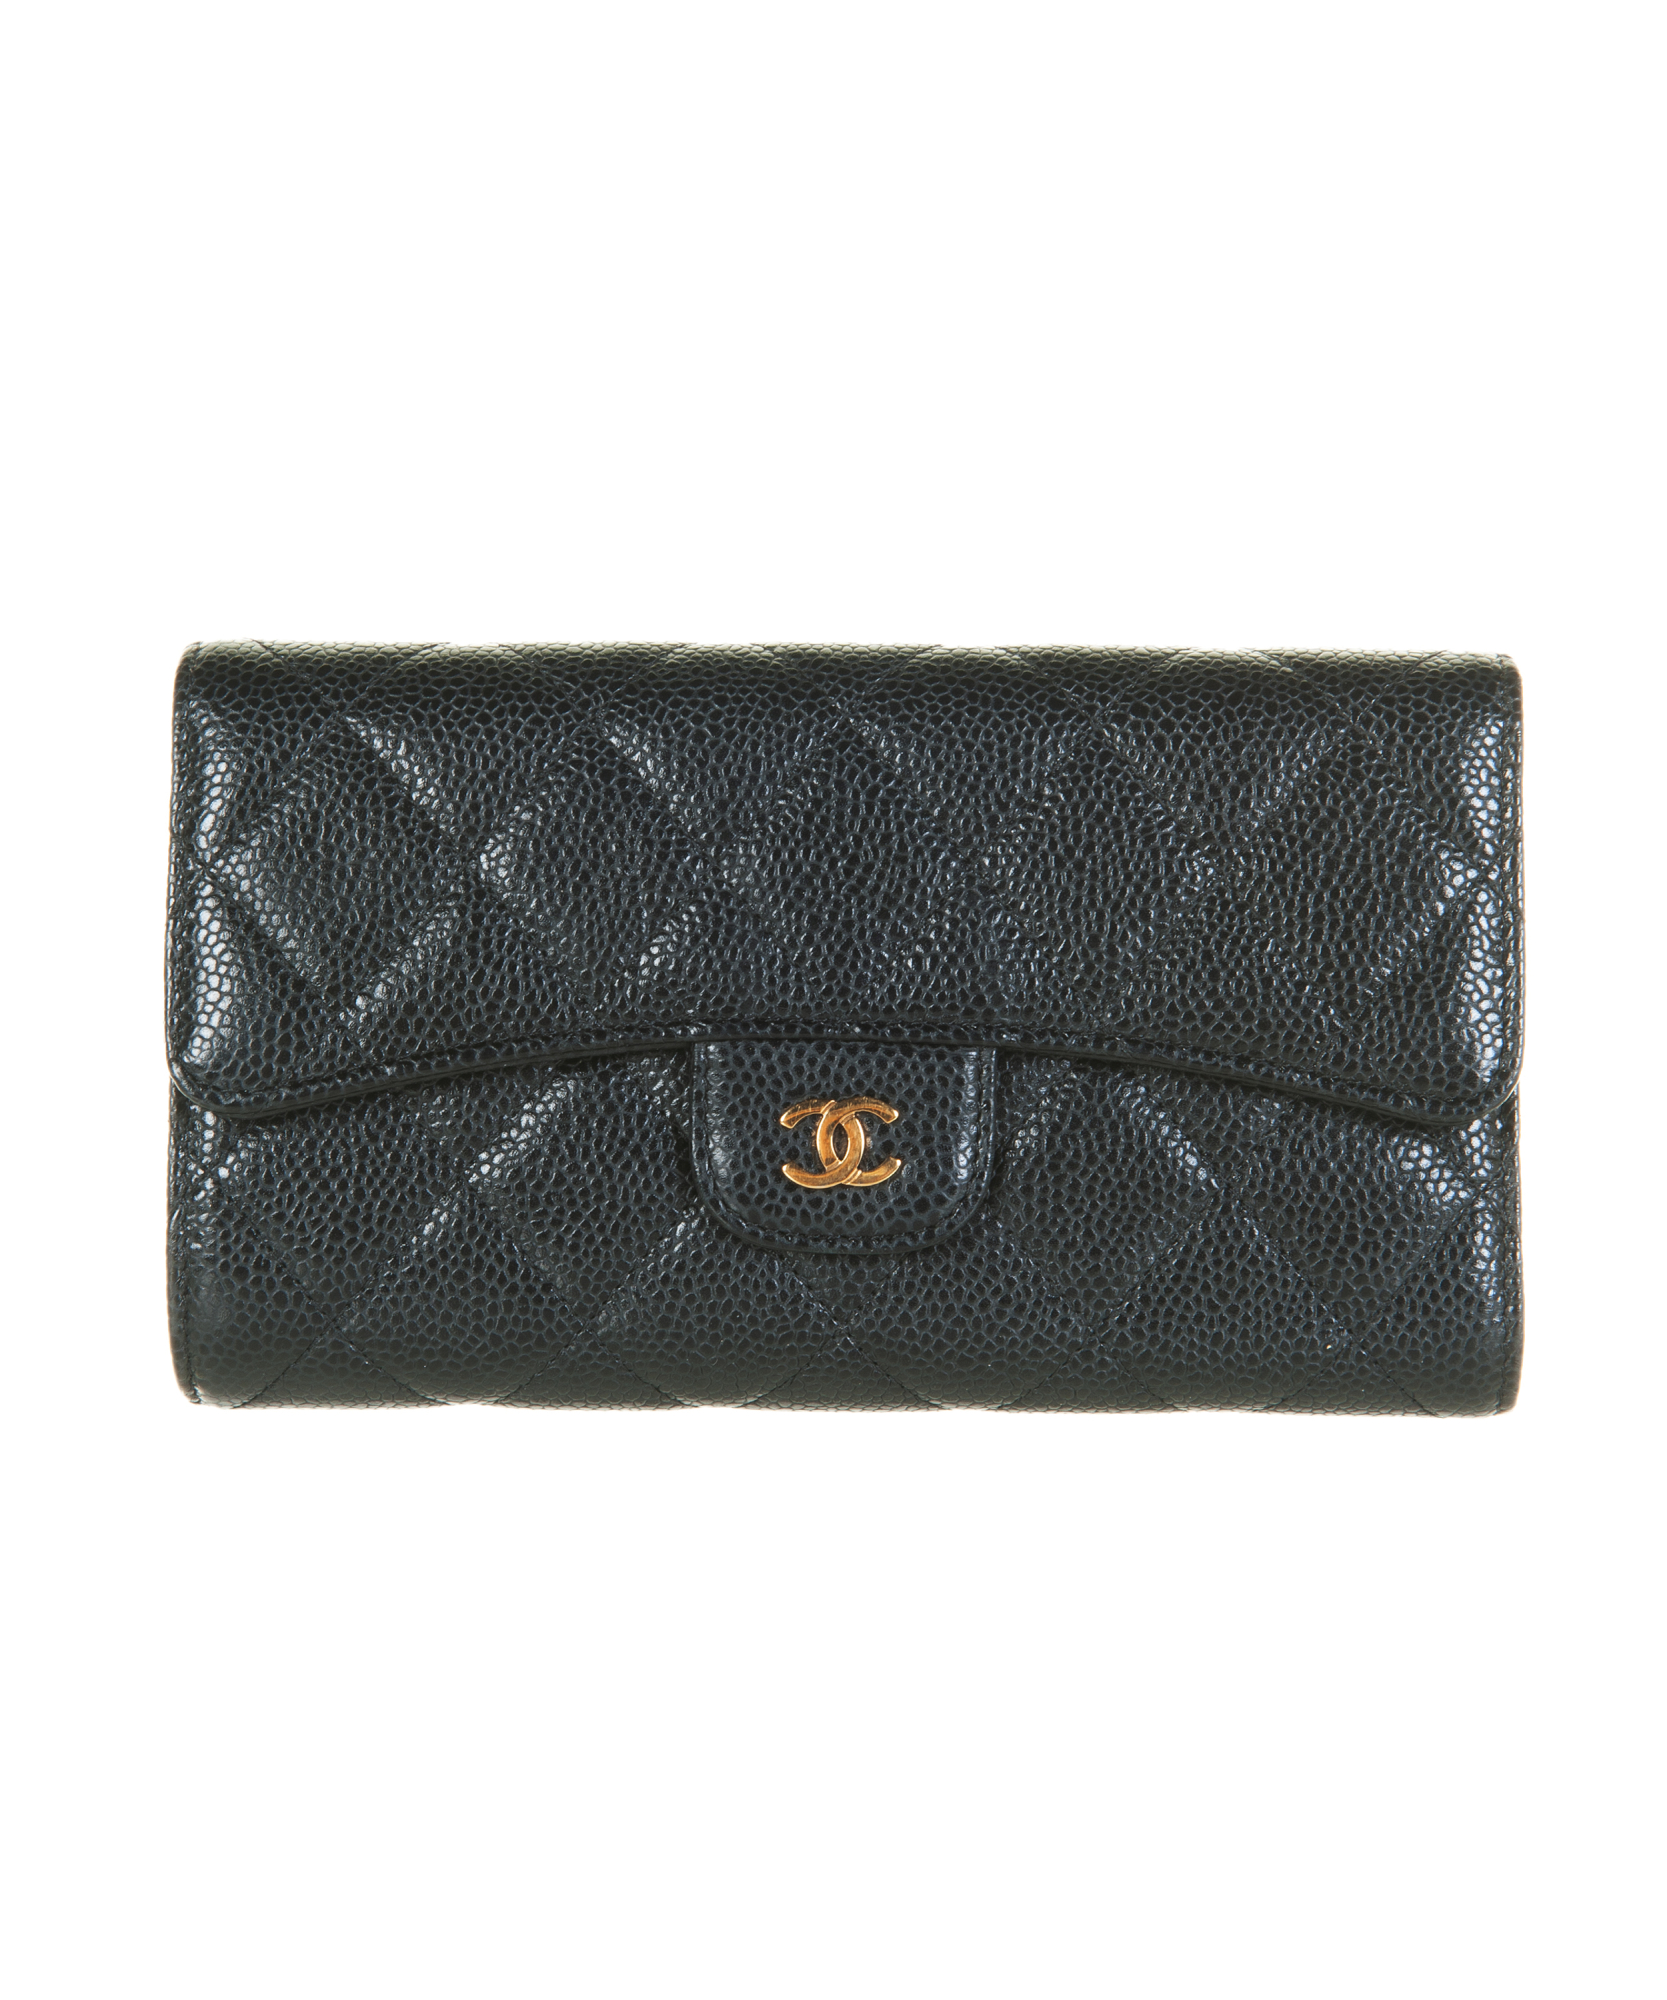 Chanel Classic Continental Long Flap Wallet Black Caviar with Gold Hardware  - Chanel | La Doyenne